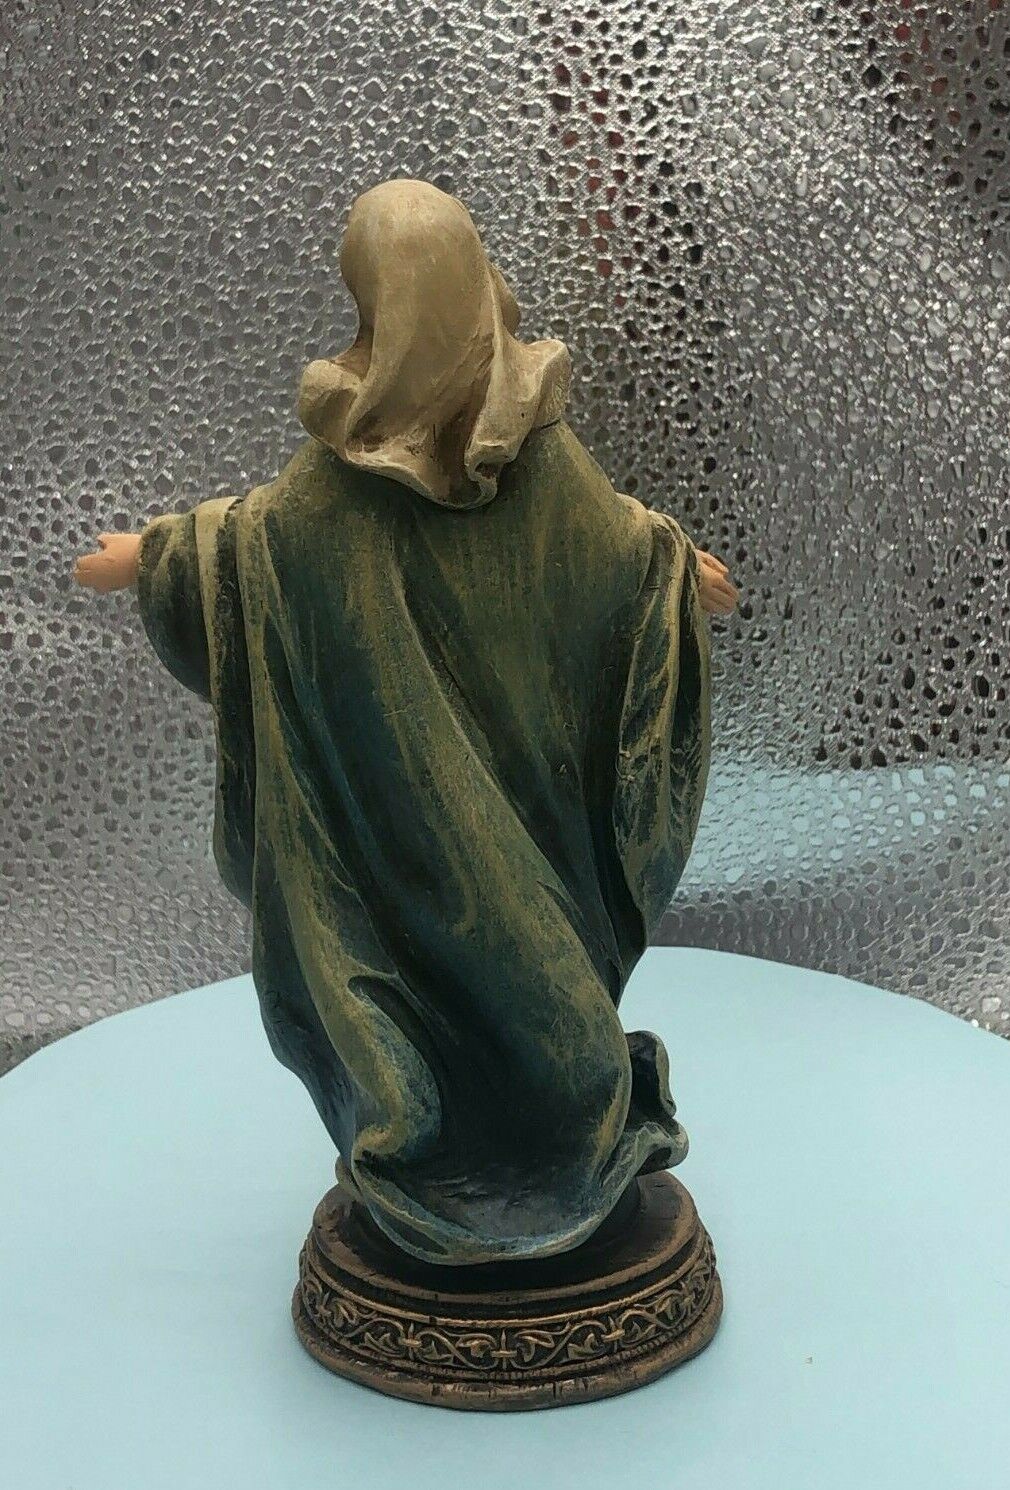 Our Lady of Grace 6" Statue, New